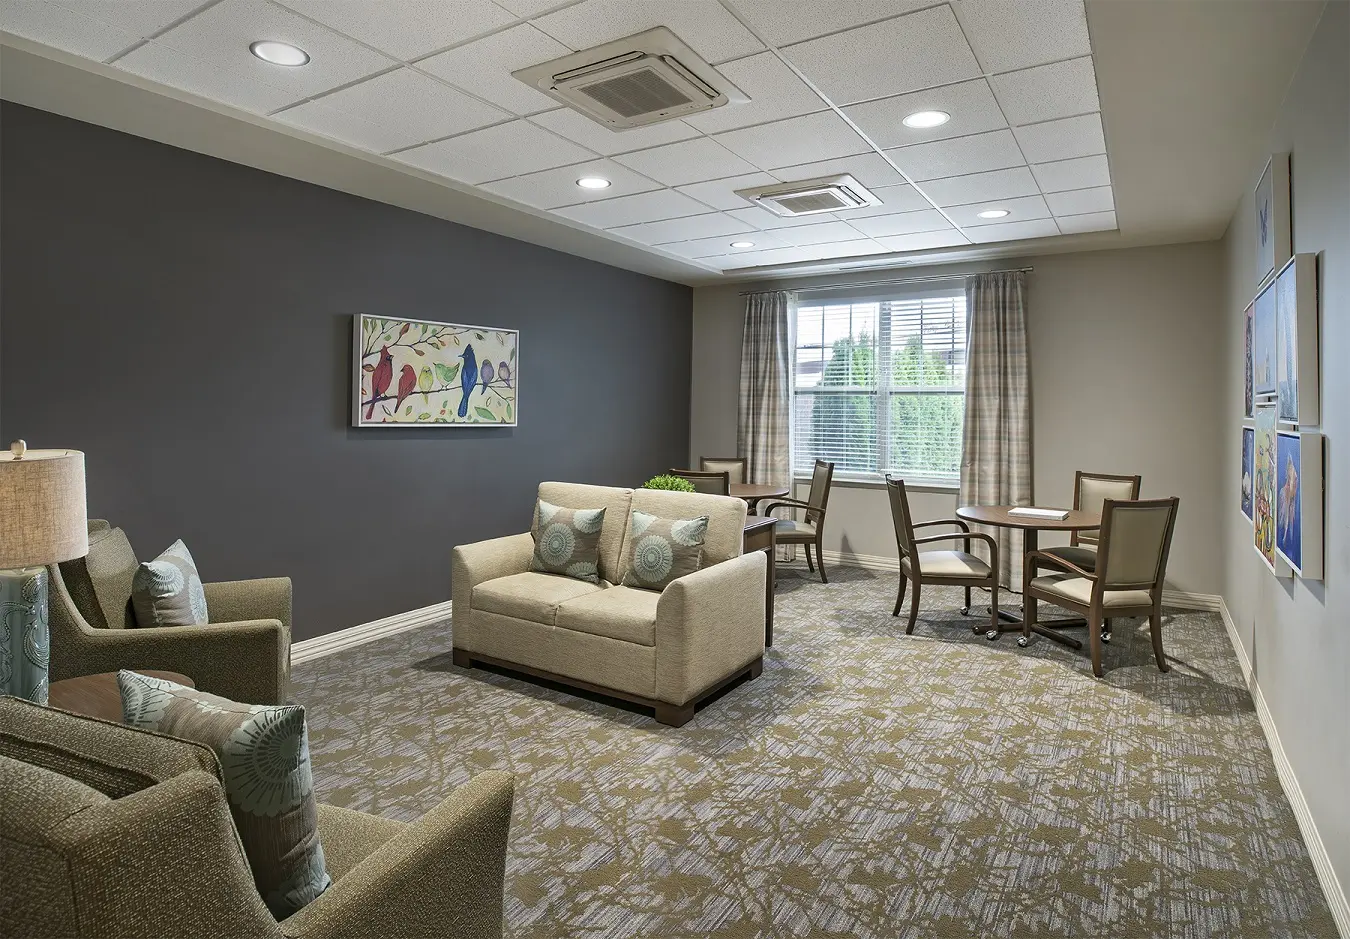 Carpeted common area at American House Freedom Place Roseville, a memory care community in Roseville, Michigan